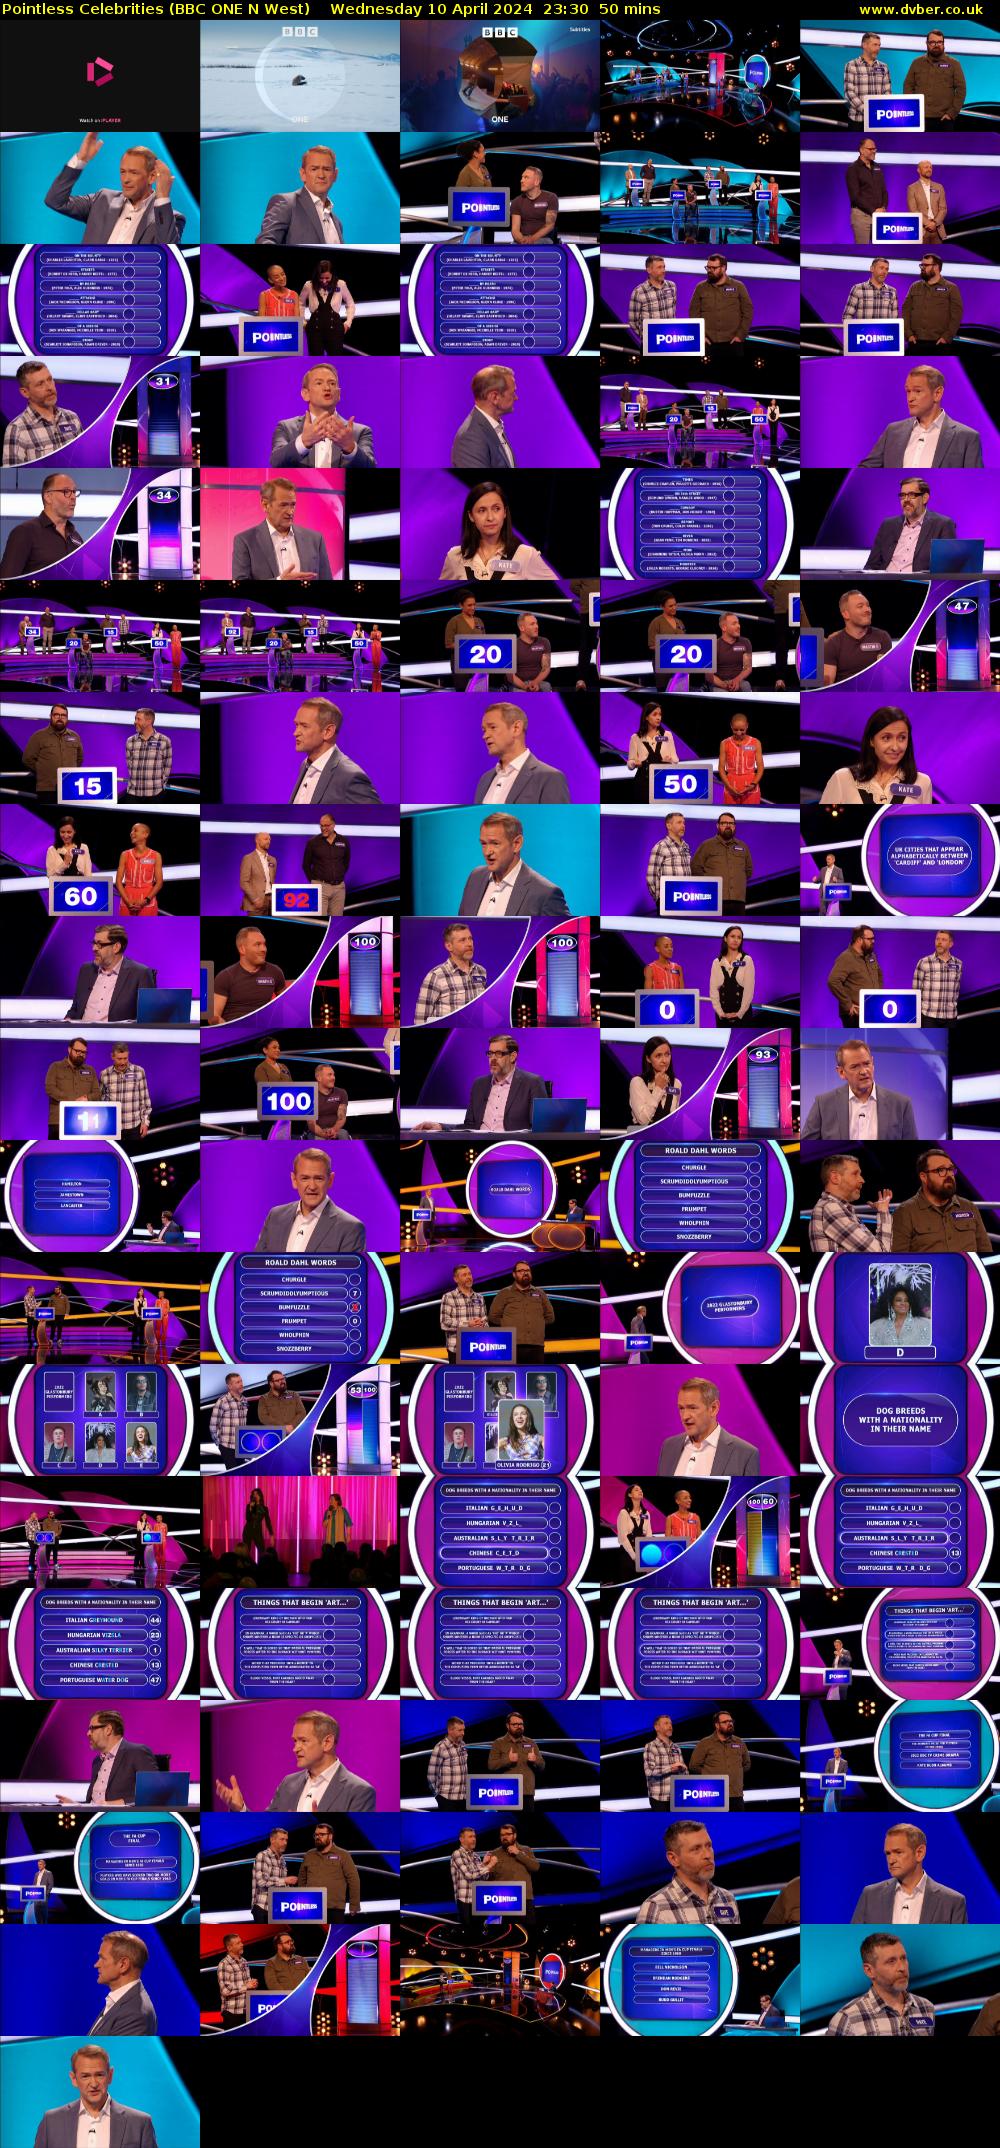 Pointless Celebrities (BBC ONE N West) Wednesday 10 April 2024 23:30 - 00:20